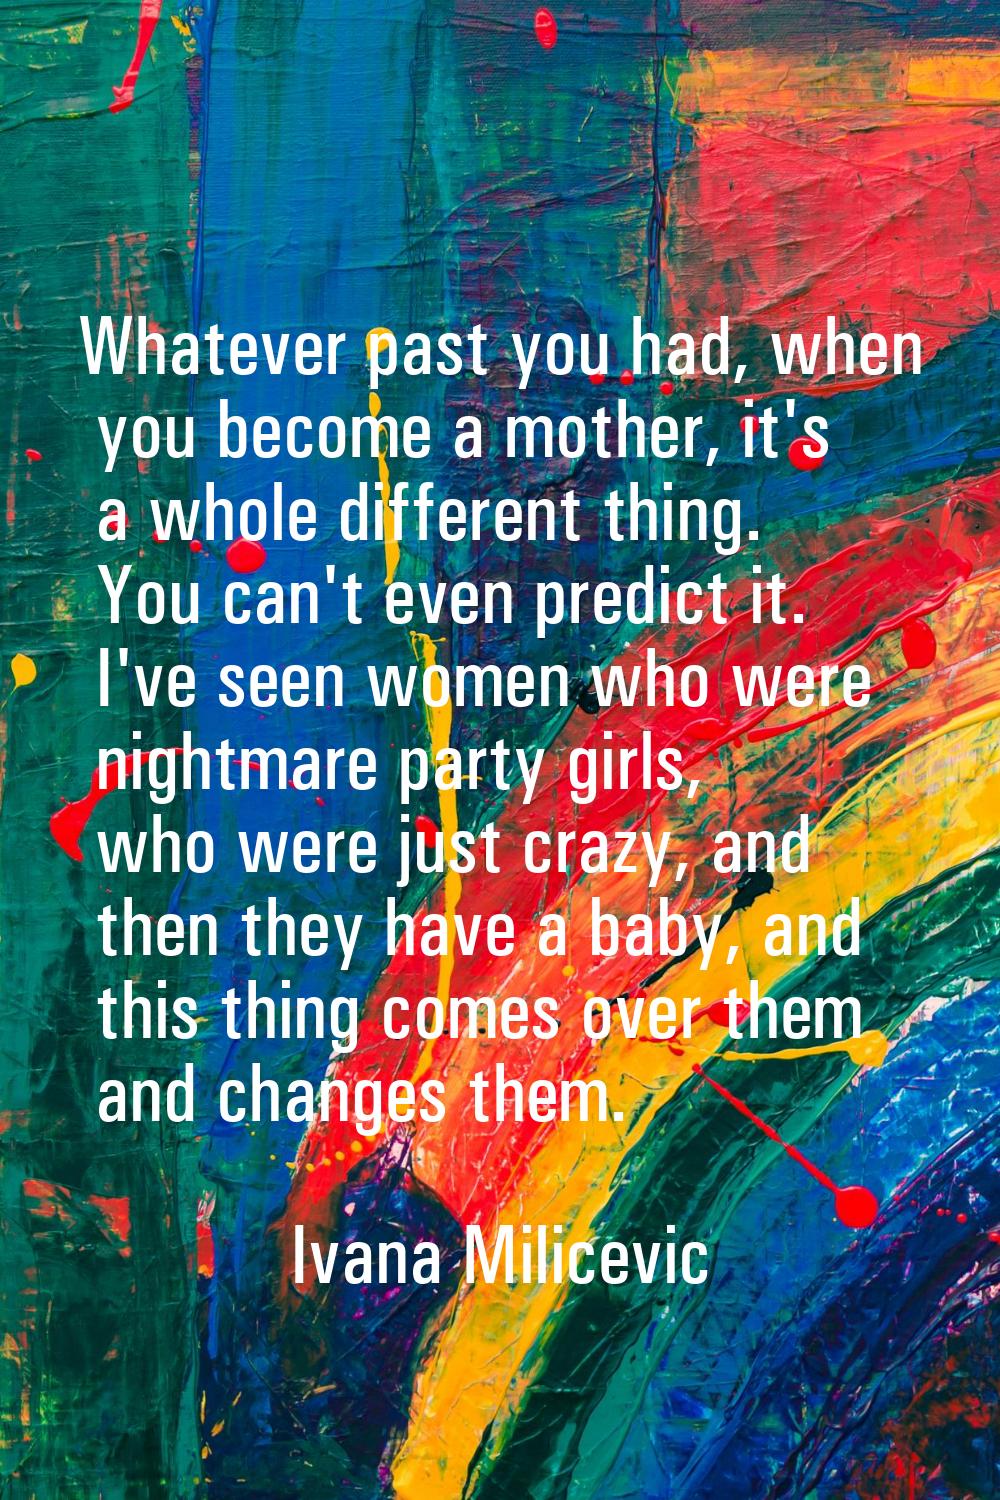 Whatever past you had, when you become a mother, it's a whole different thing. You can't even predi